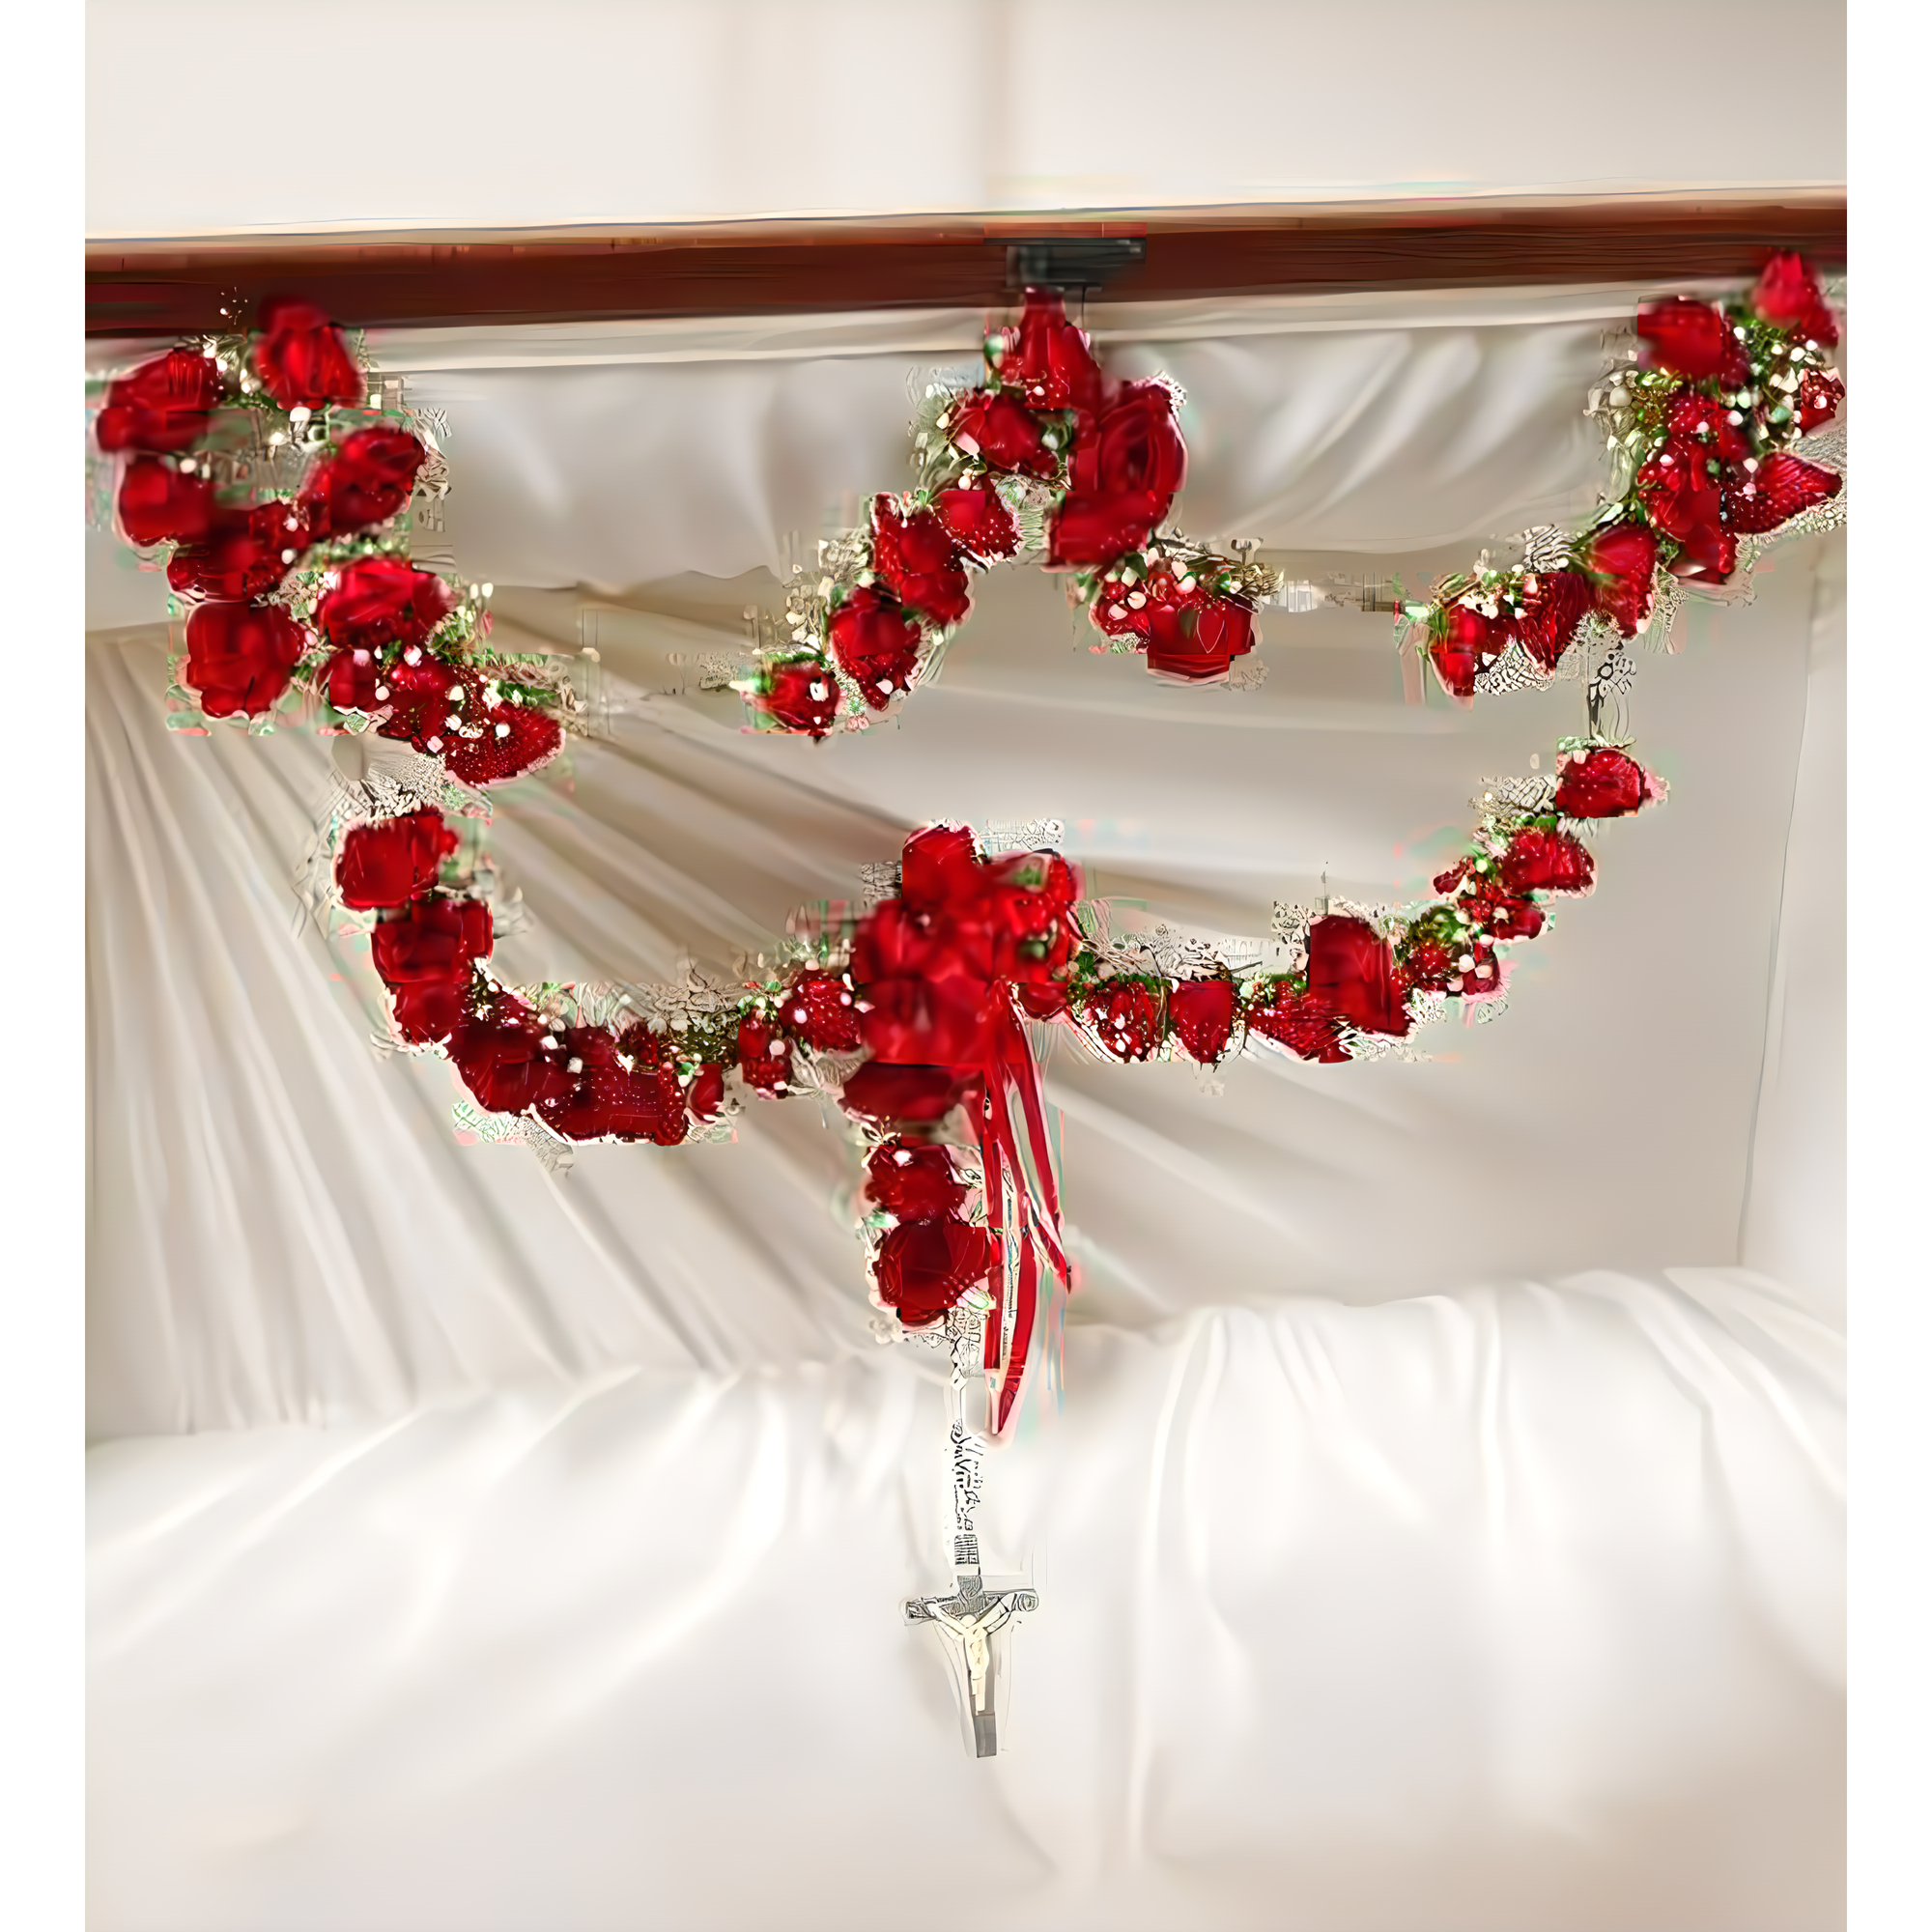 Manhattan Flower Delivery - Large Rosary with Red Spray Roses - Funeral > Casket Sprays